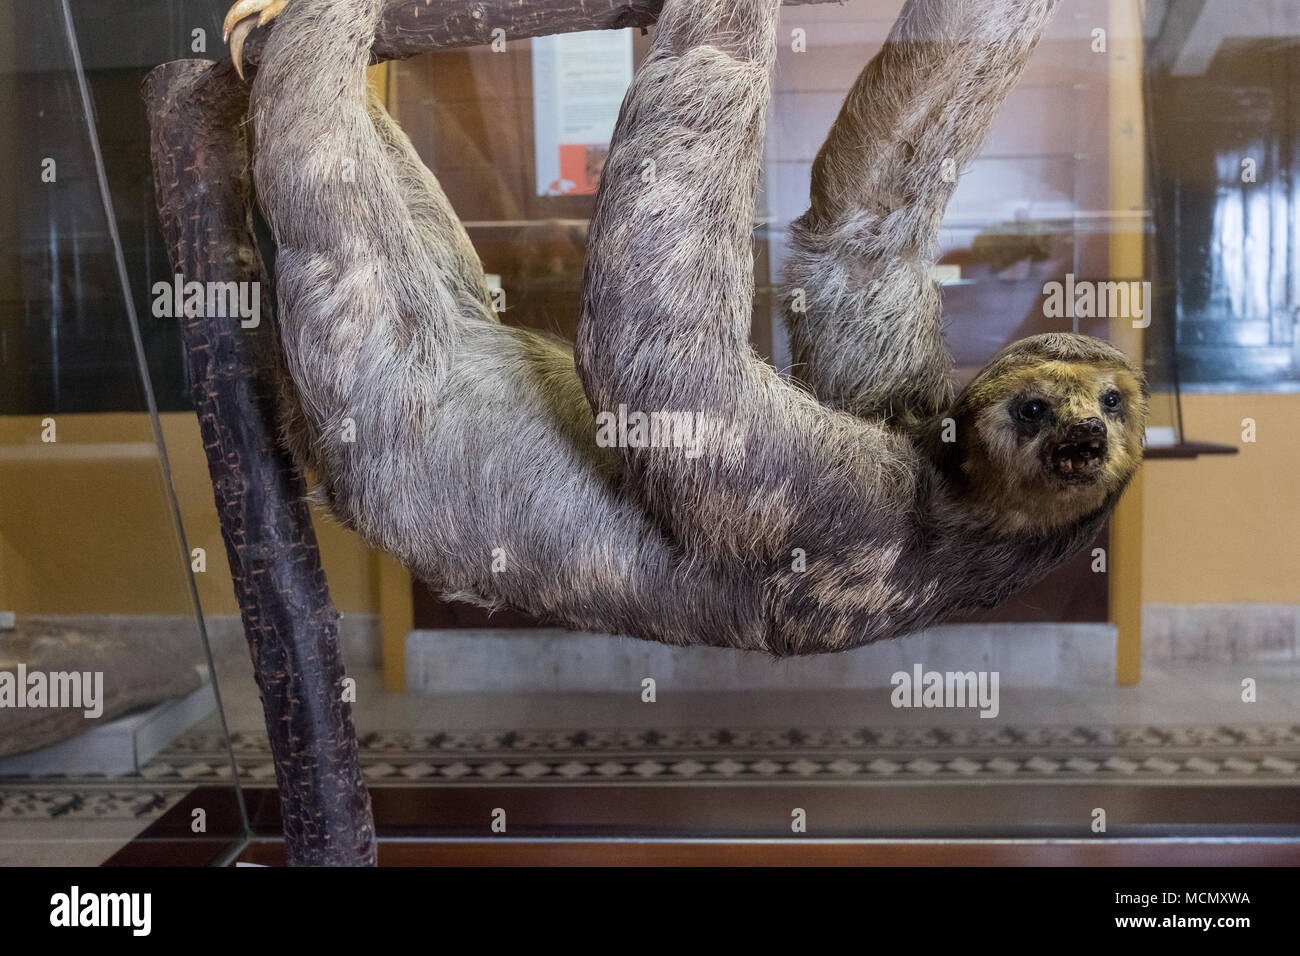 A sloath on display at the Museum of Martural History at  the Instituto de Canarias museum, La Laguna, Tenerife. Stock Photo